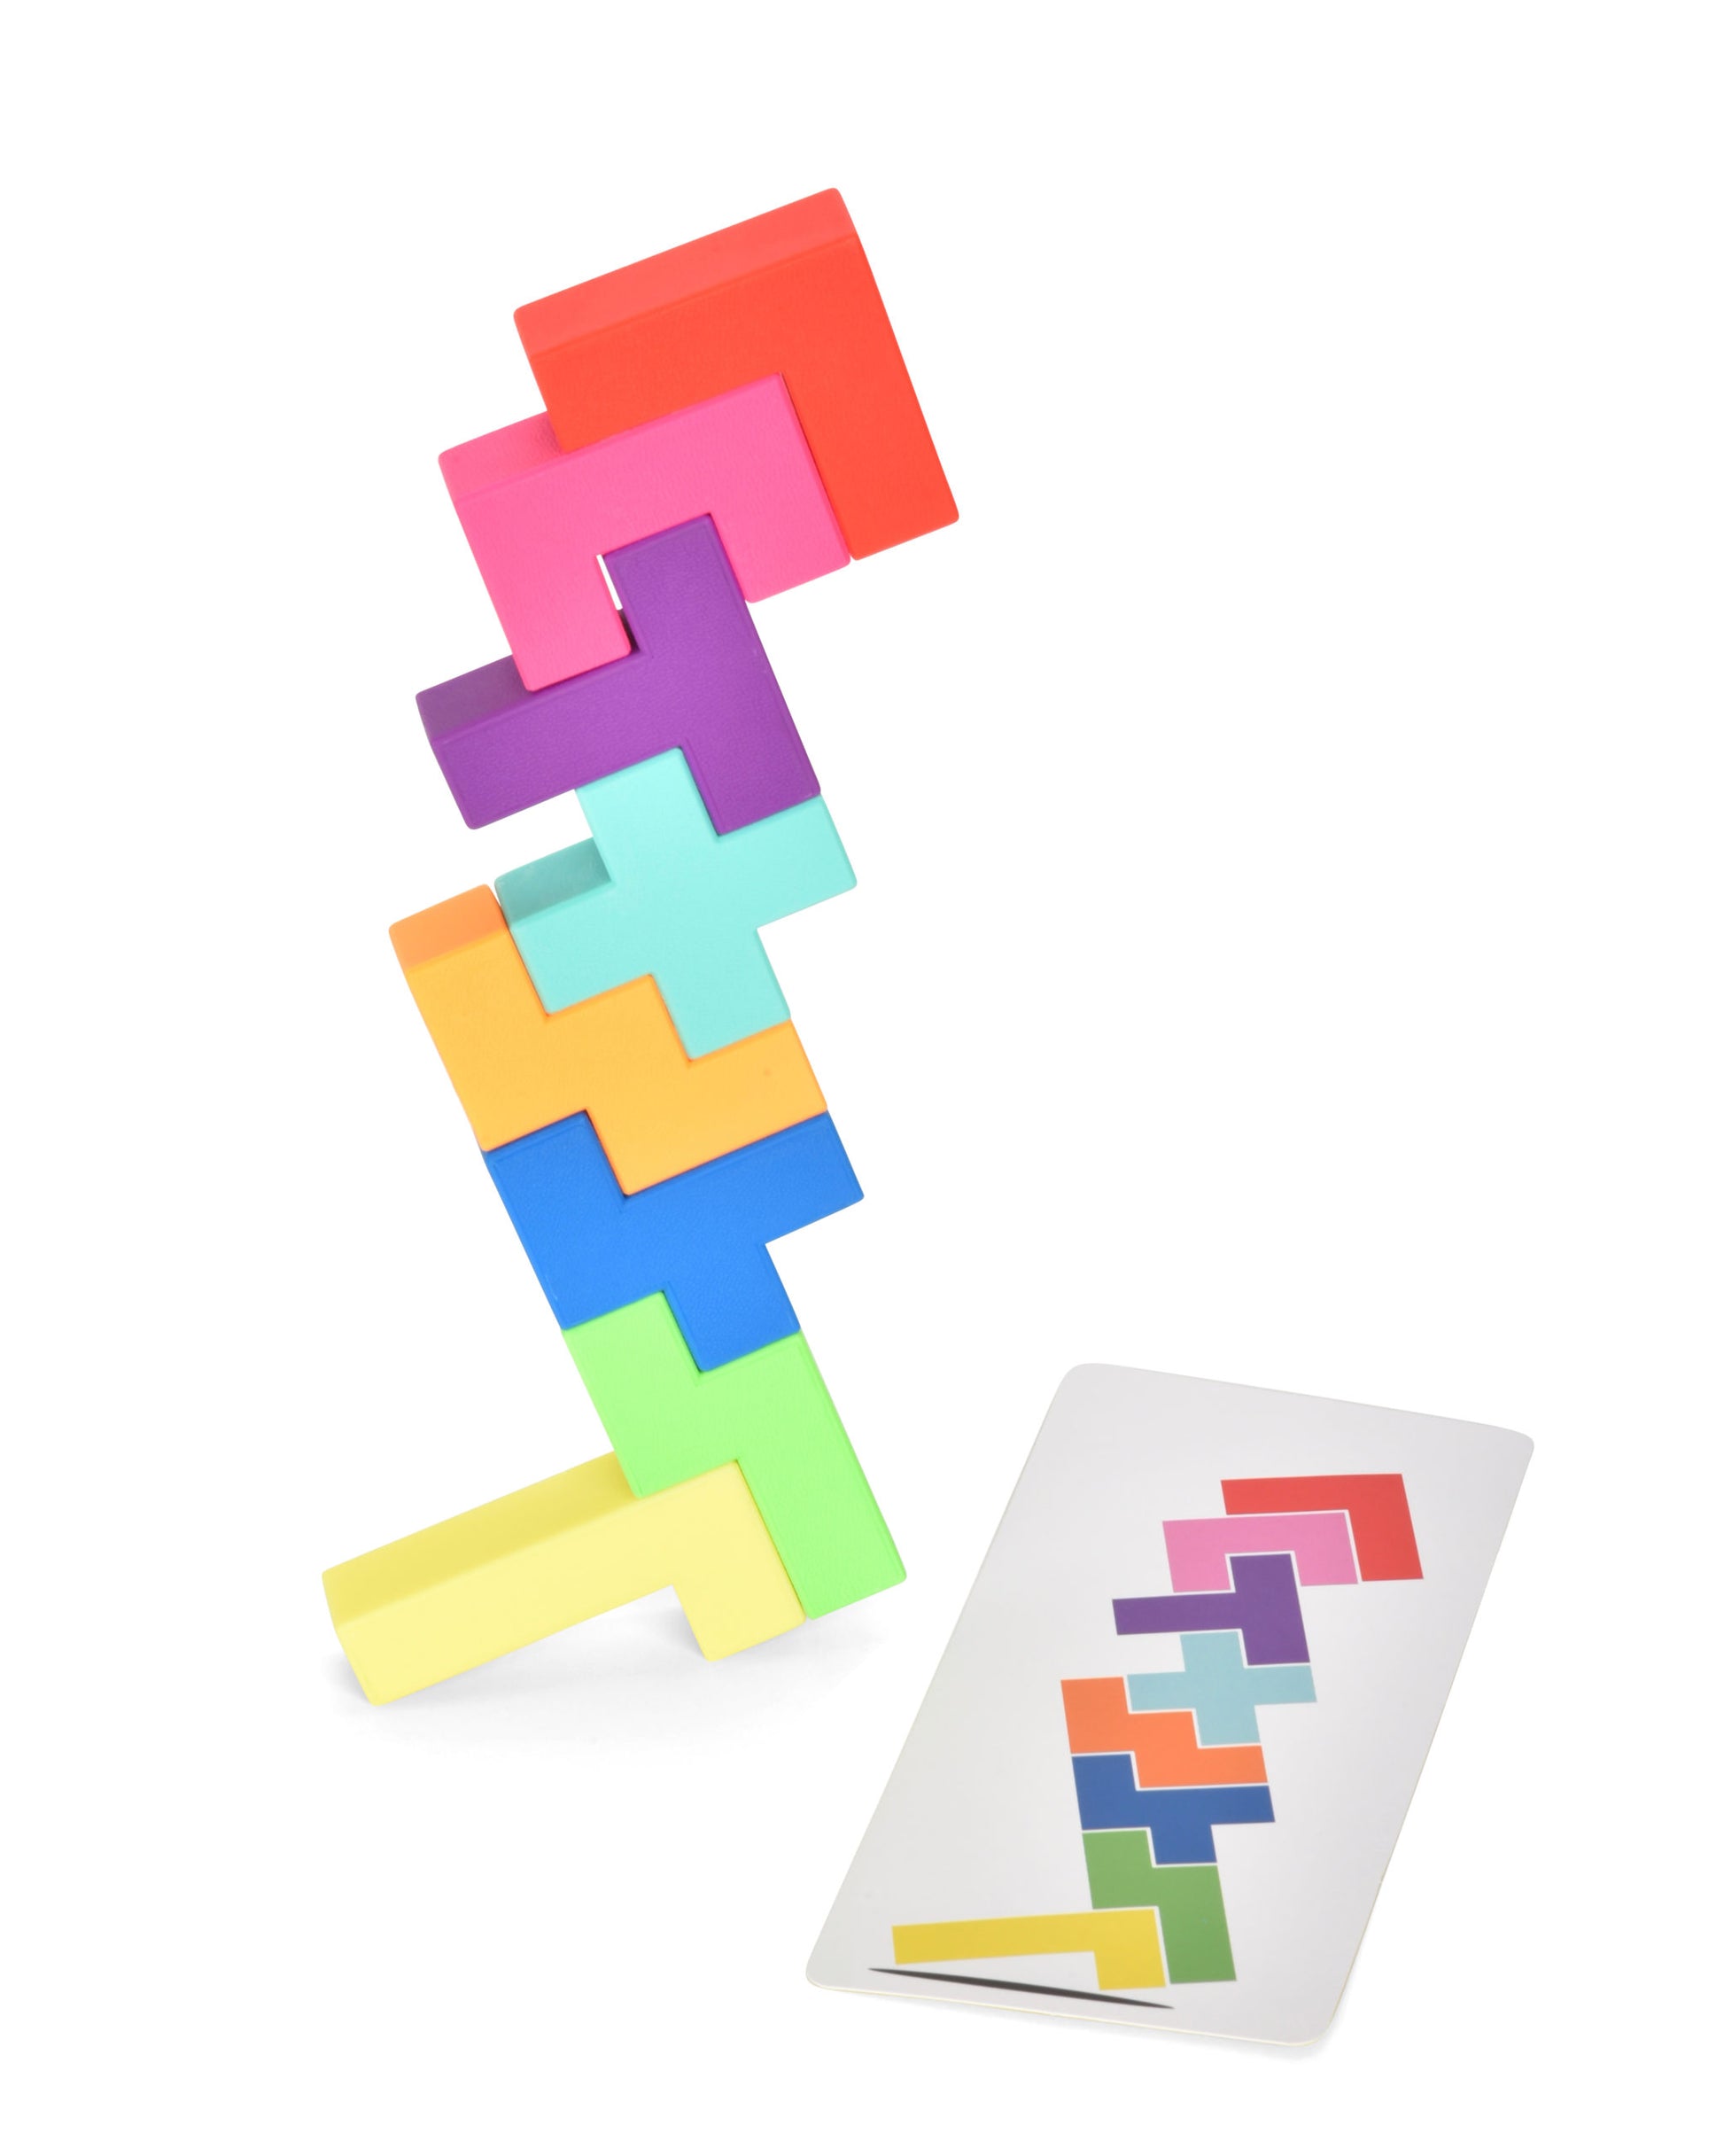 stack of blocks and a card on white background.